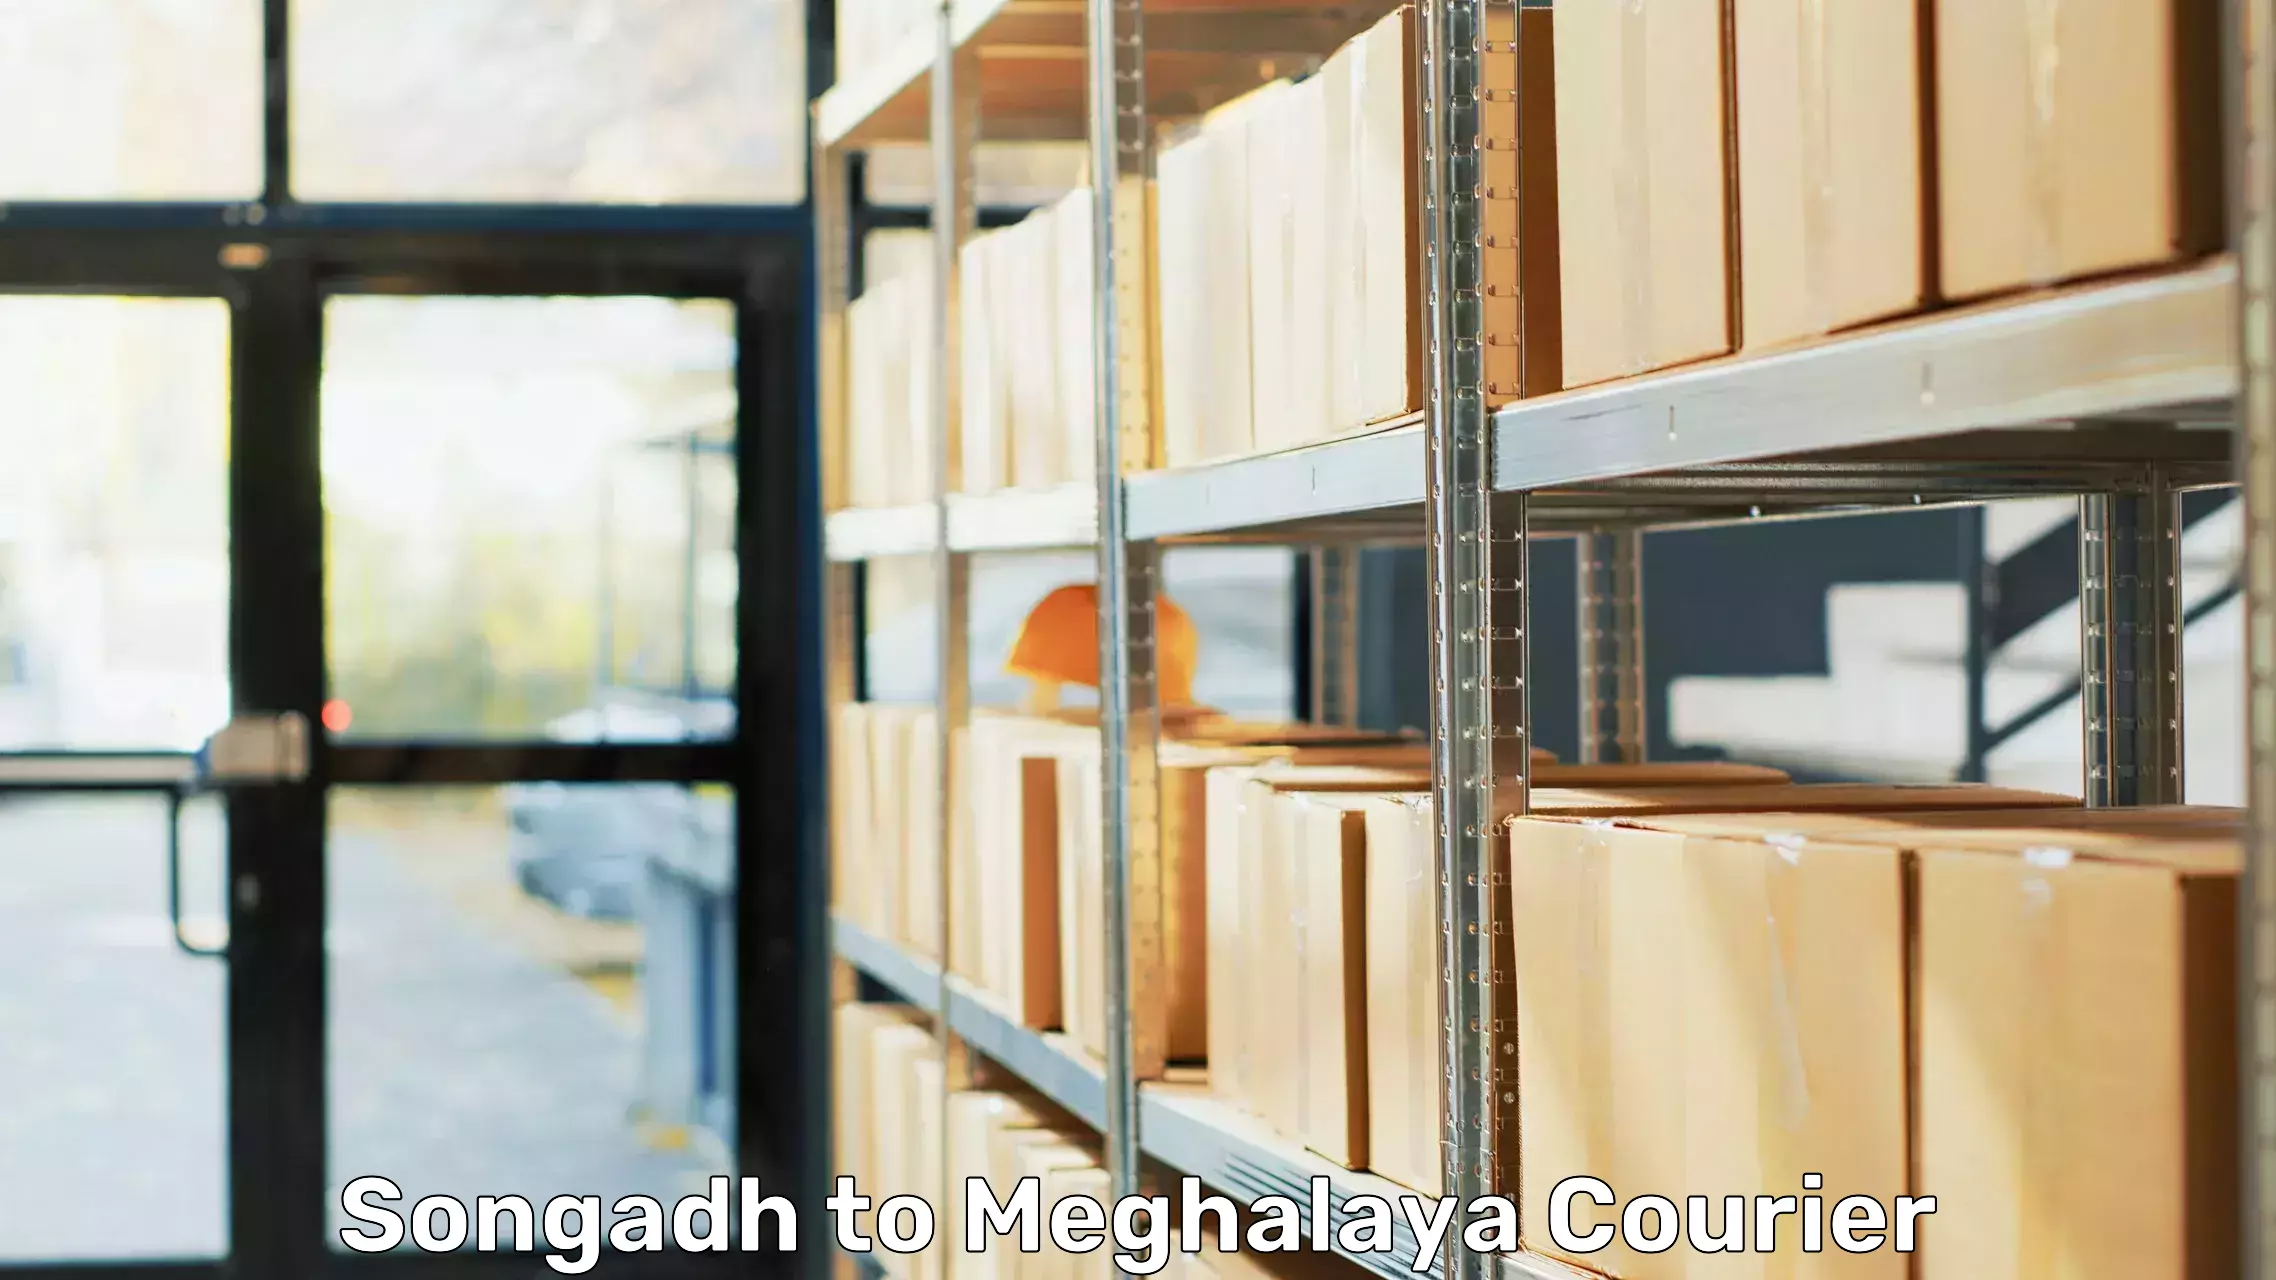 Household goods transport service Songadh to Meghalaya